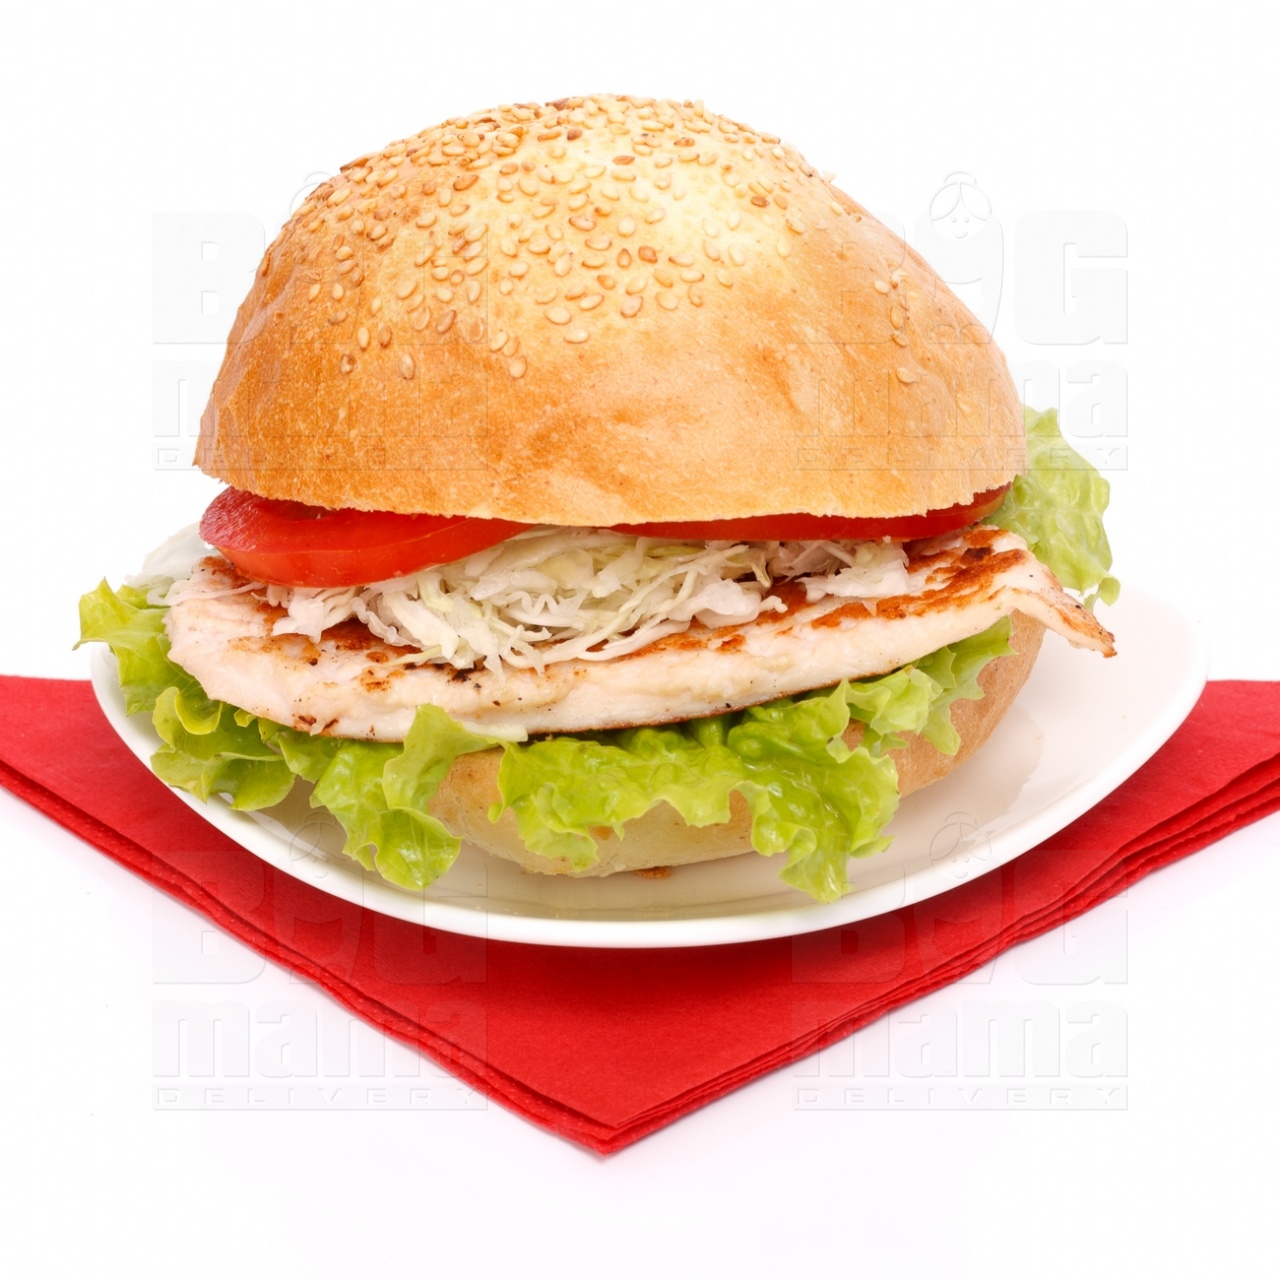 Product #56 image - Big sandwich with barbecued chicken breast